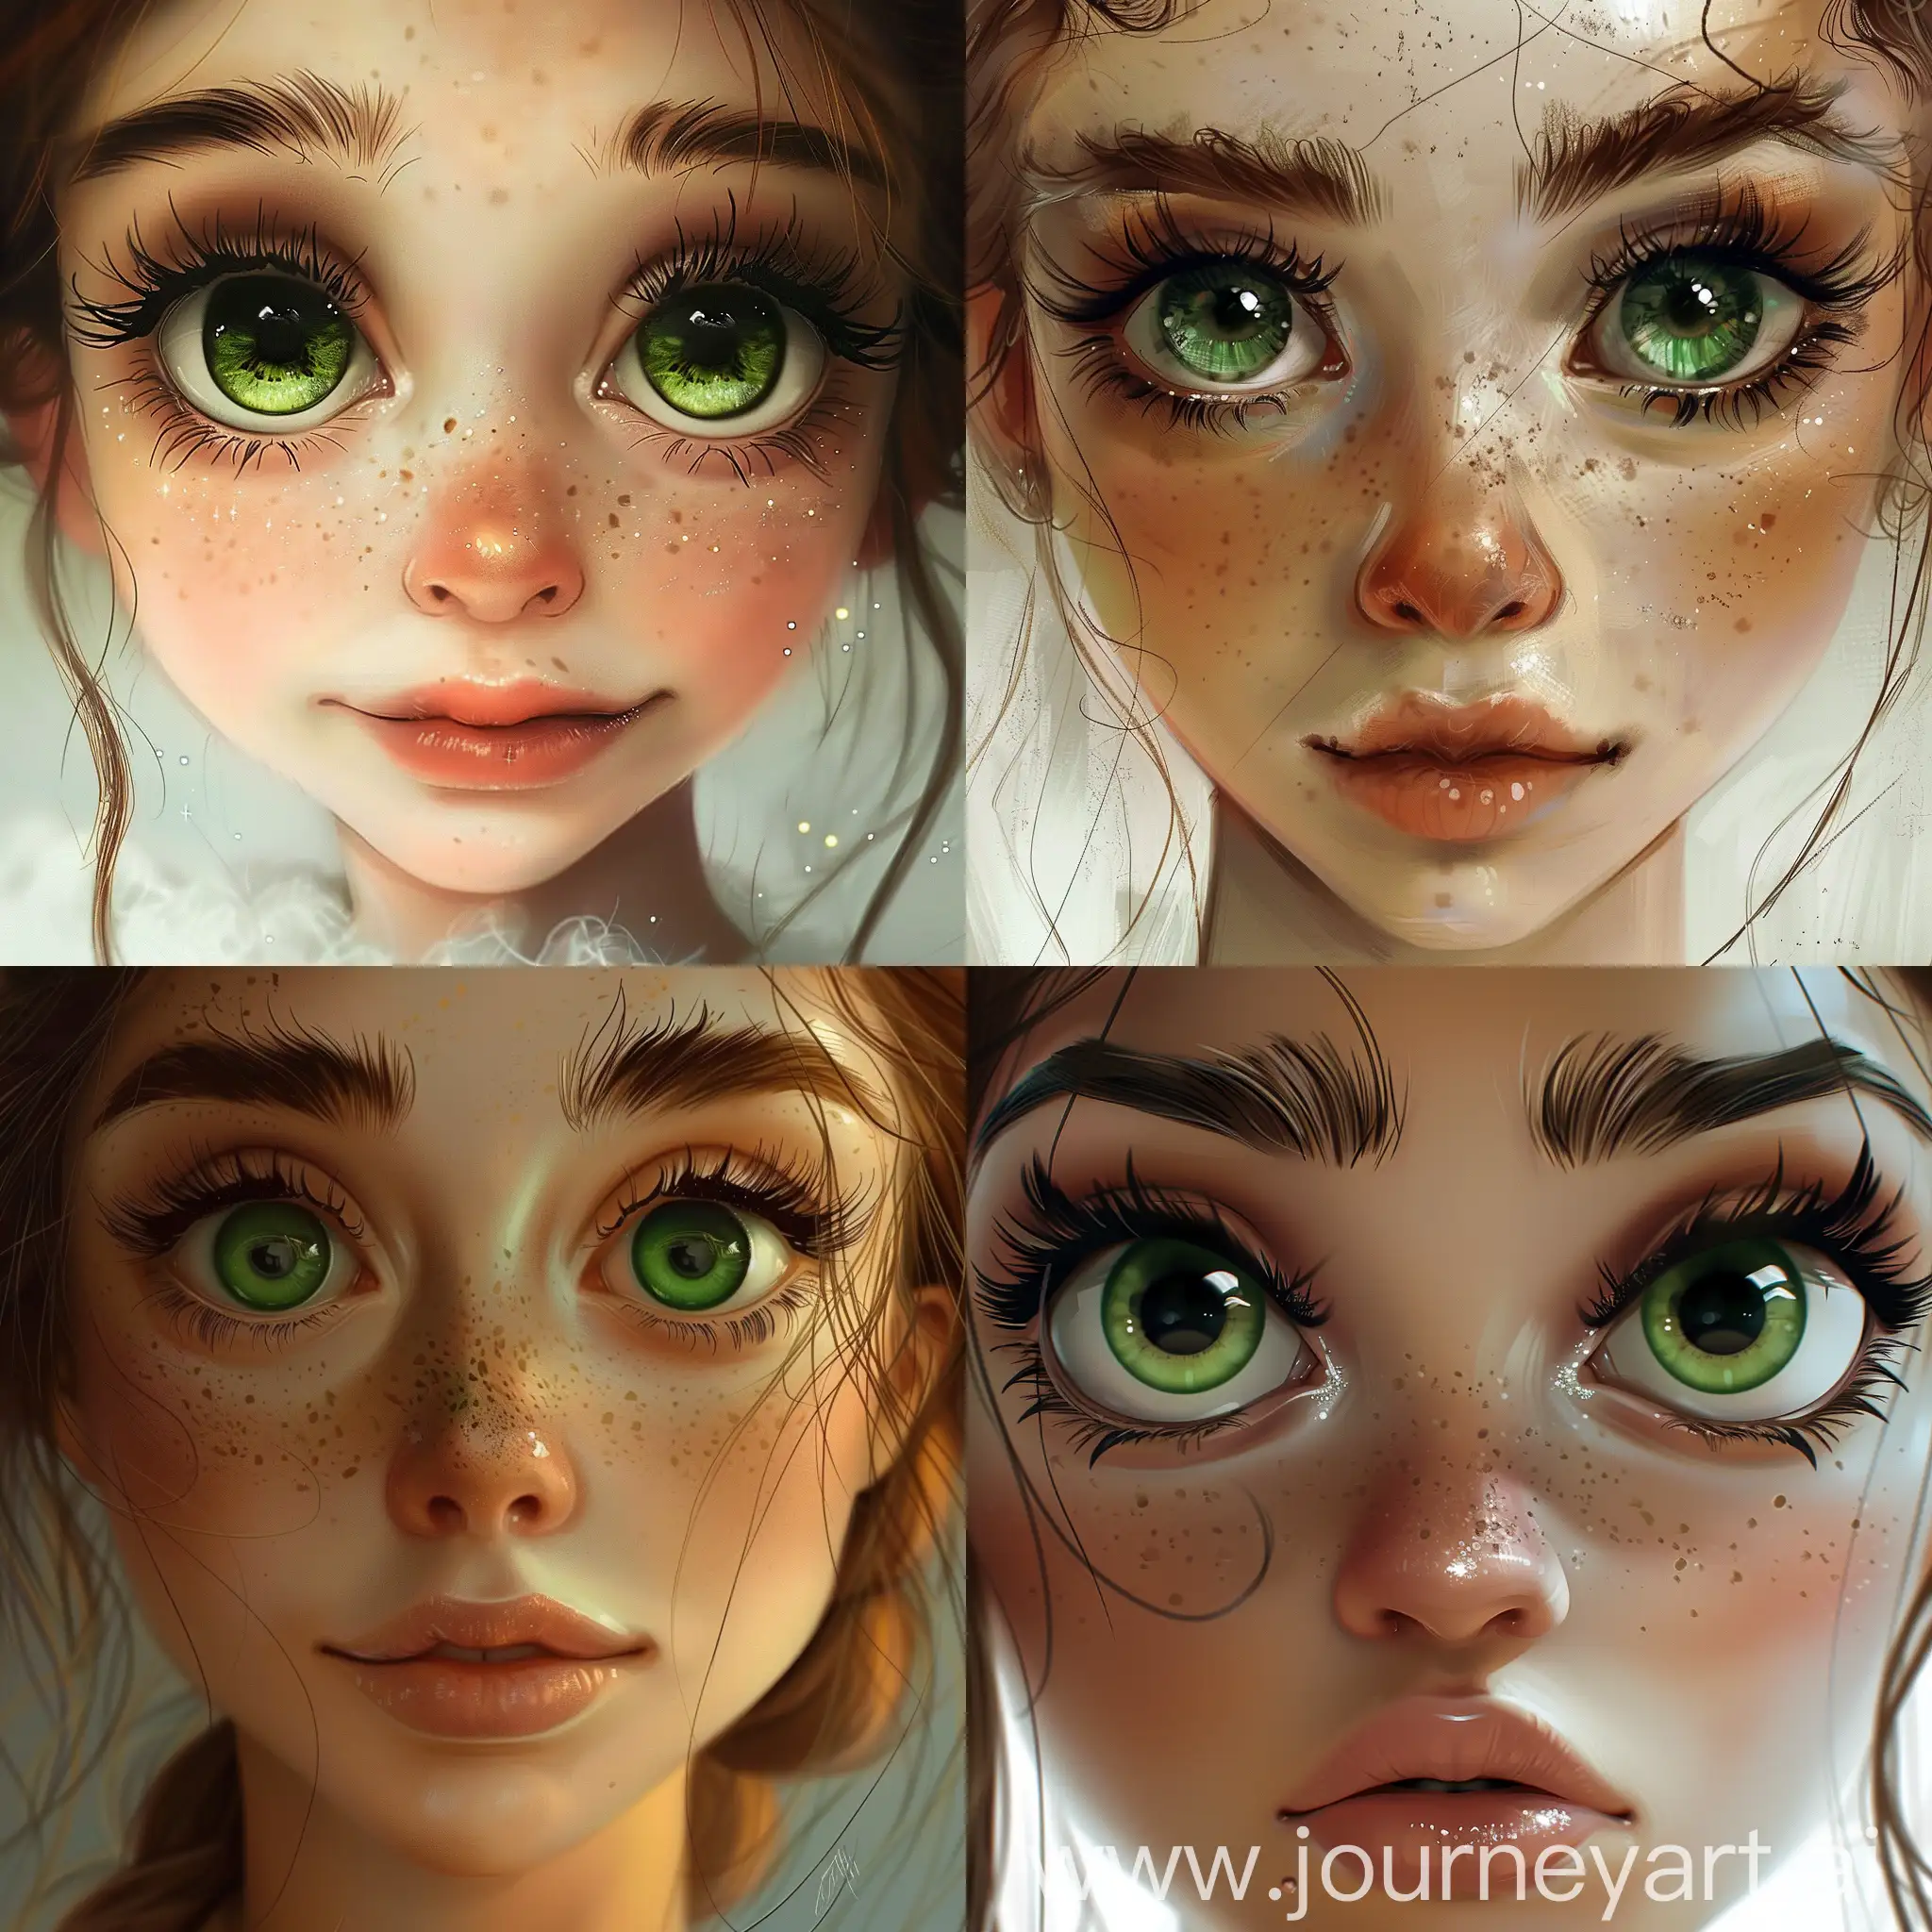 Portrait-of-a-Girl-with-Big-Green-Eyes-and-Beautiful-Eyebrows